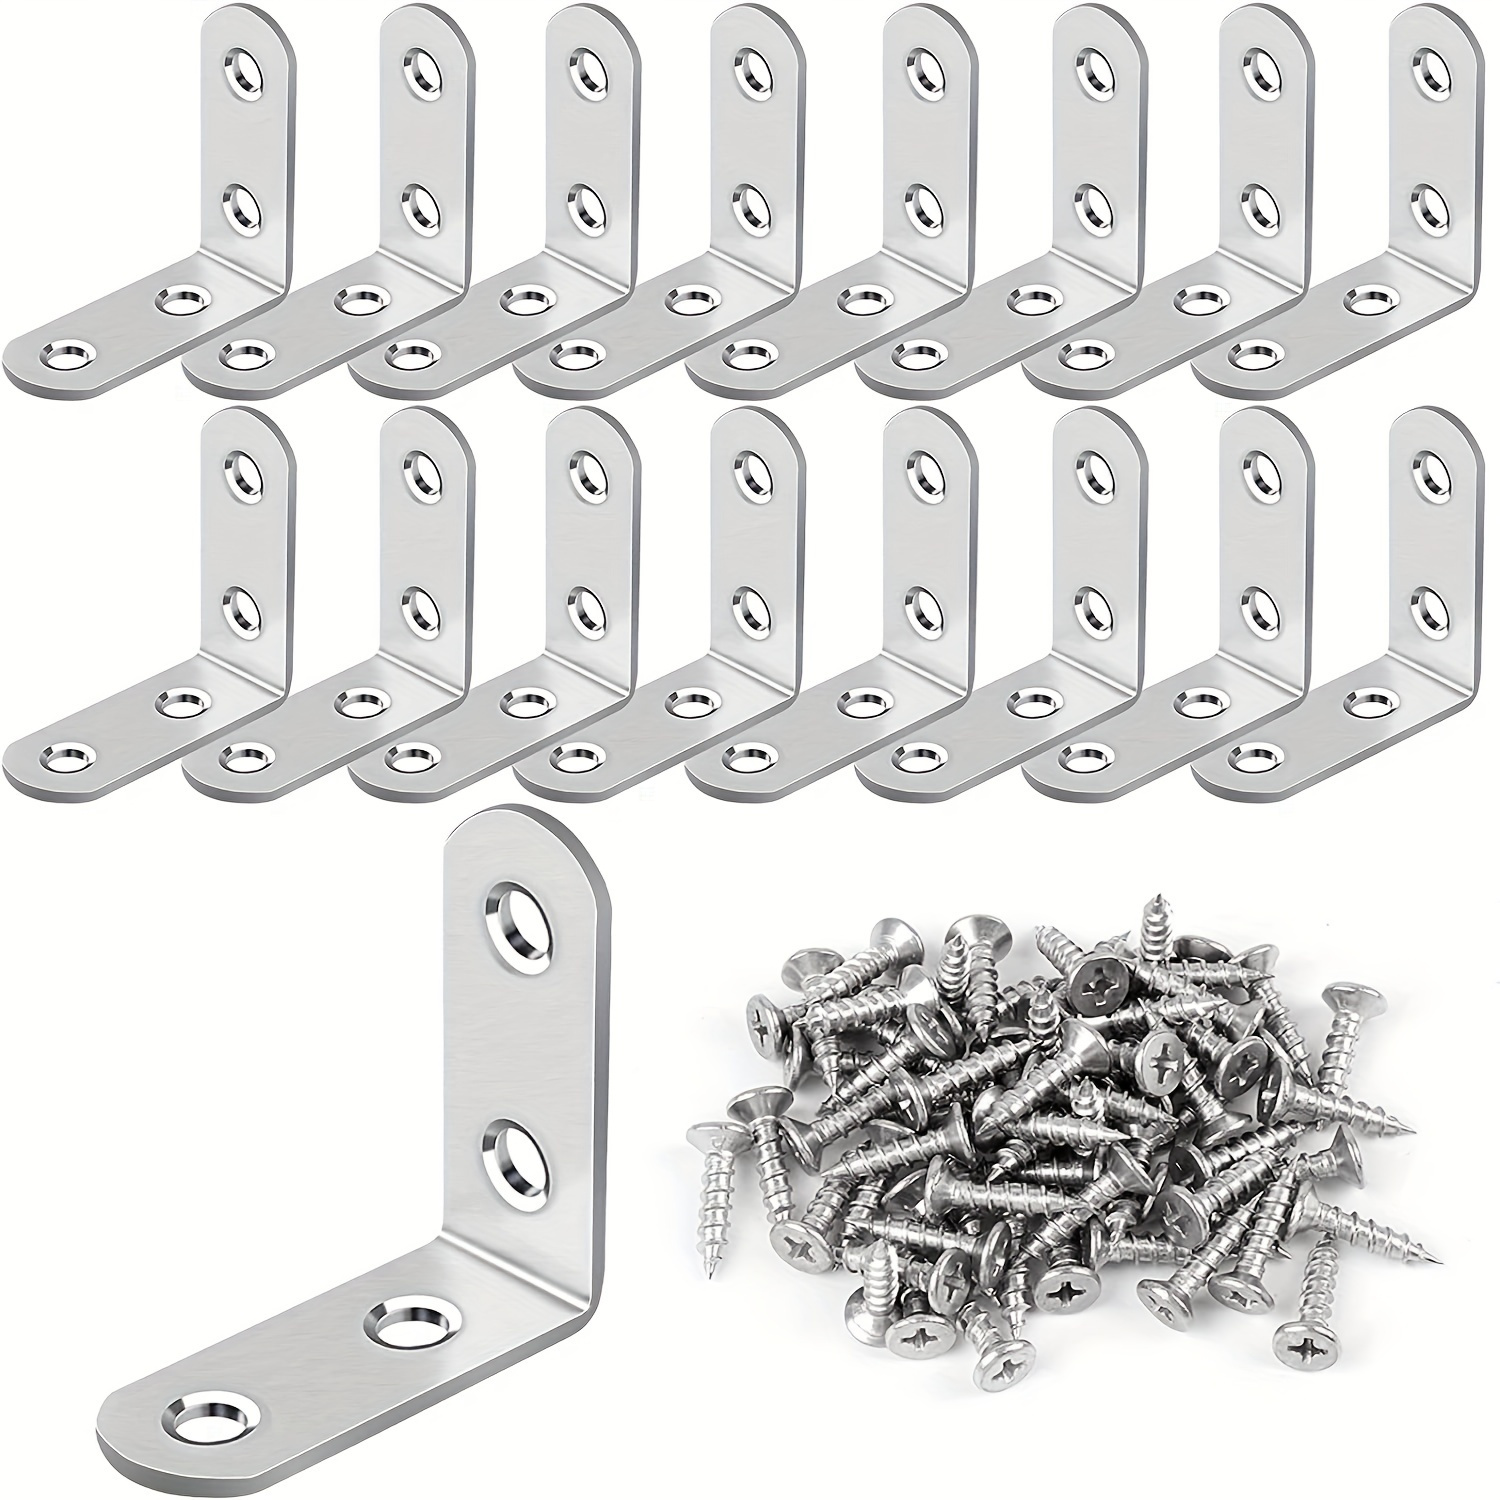 

16pcs L Bracket Stainless Steel Corner Brace Sets, 90 Degree Right Angle Bracket With 64 Pcs Screws, L Bracket Firmware Can Be Used For Wooden Shelves, Chairs, Tables, Dressers, Furniture